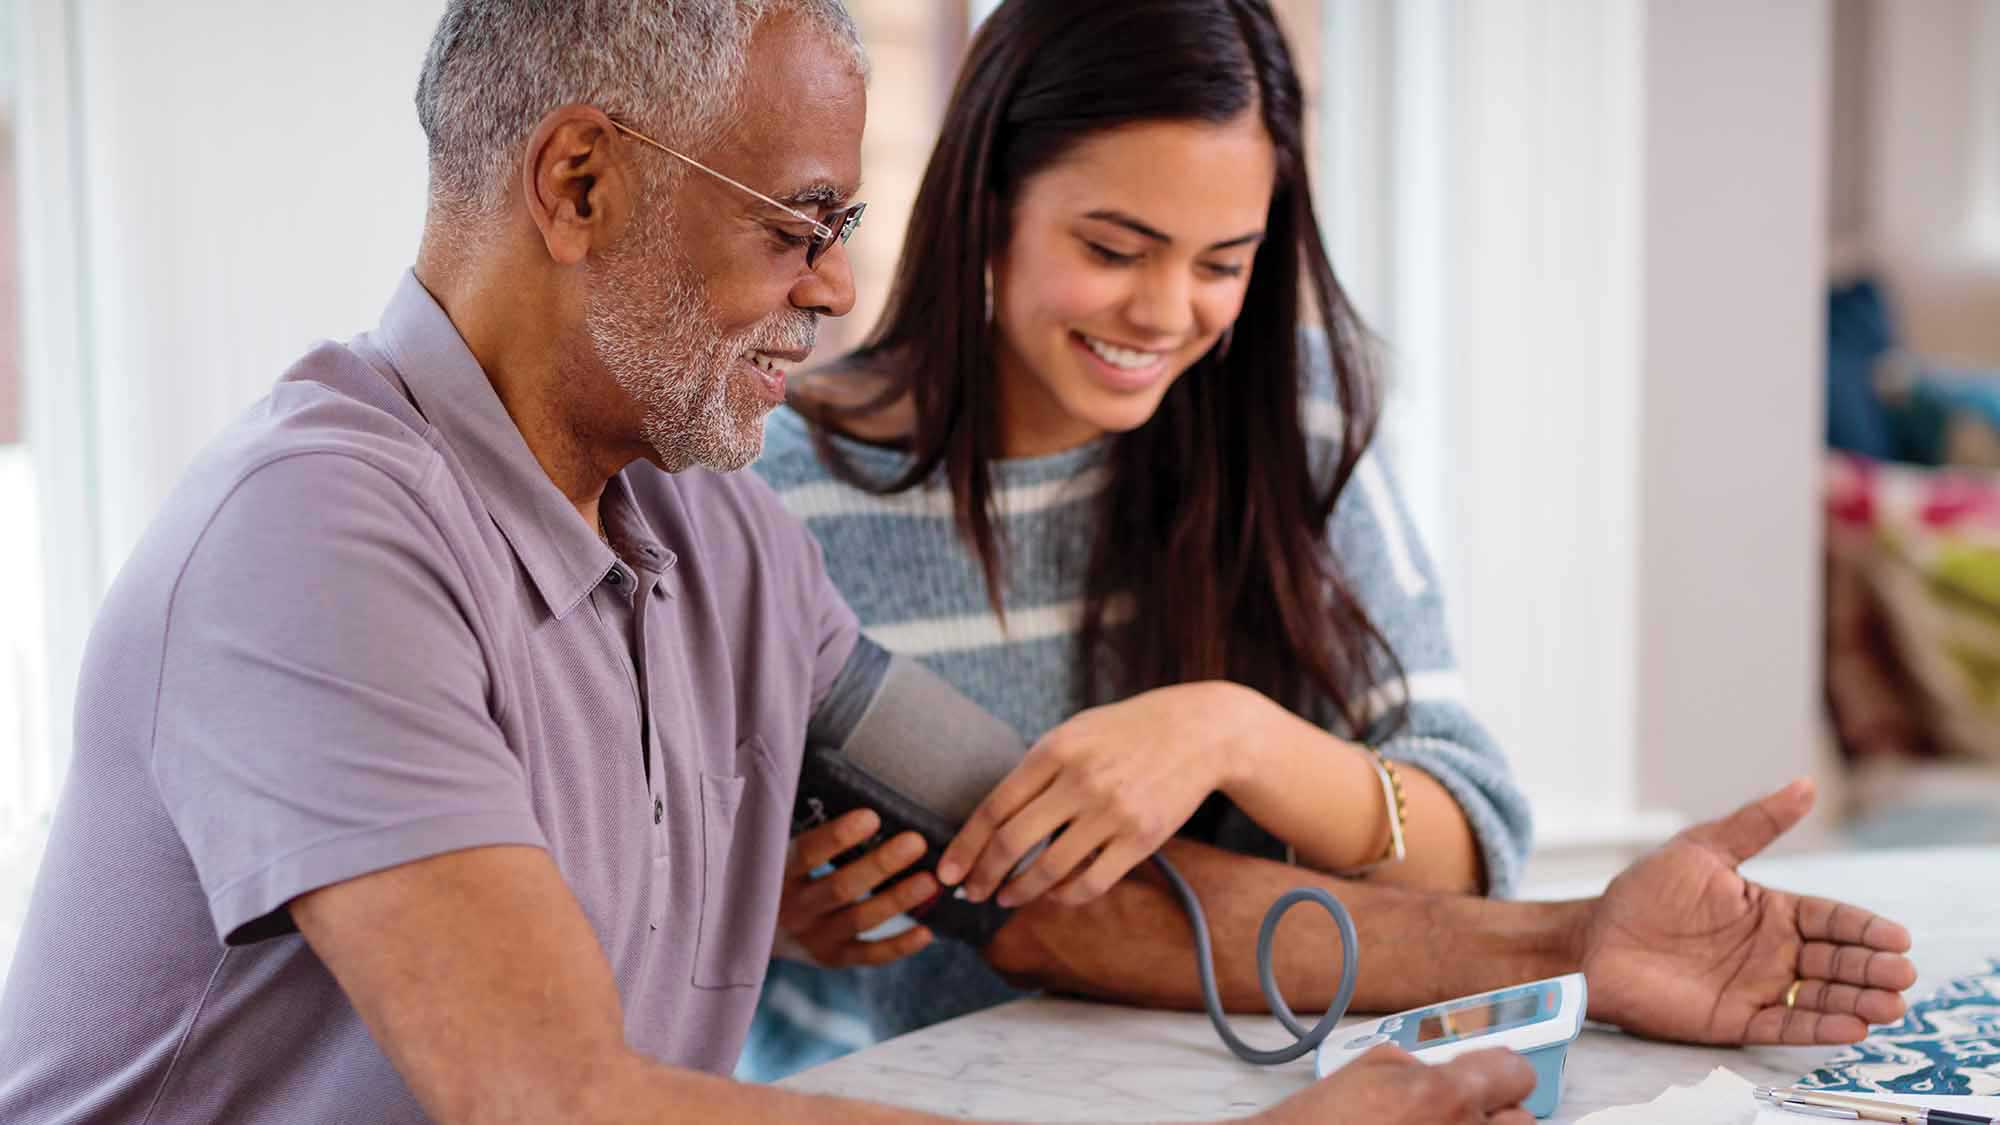 A male patient checks his blood pressure with help from an in-home health profressional